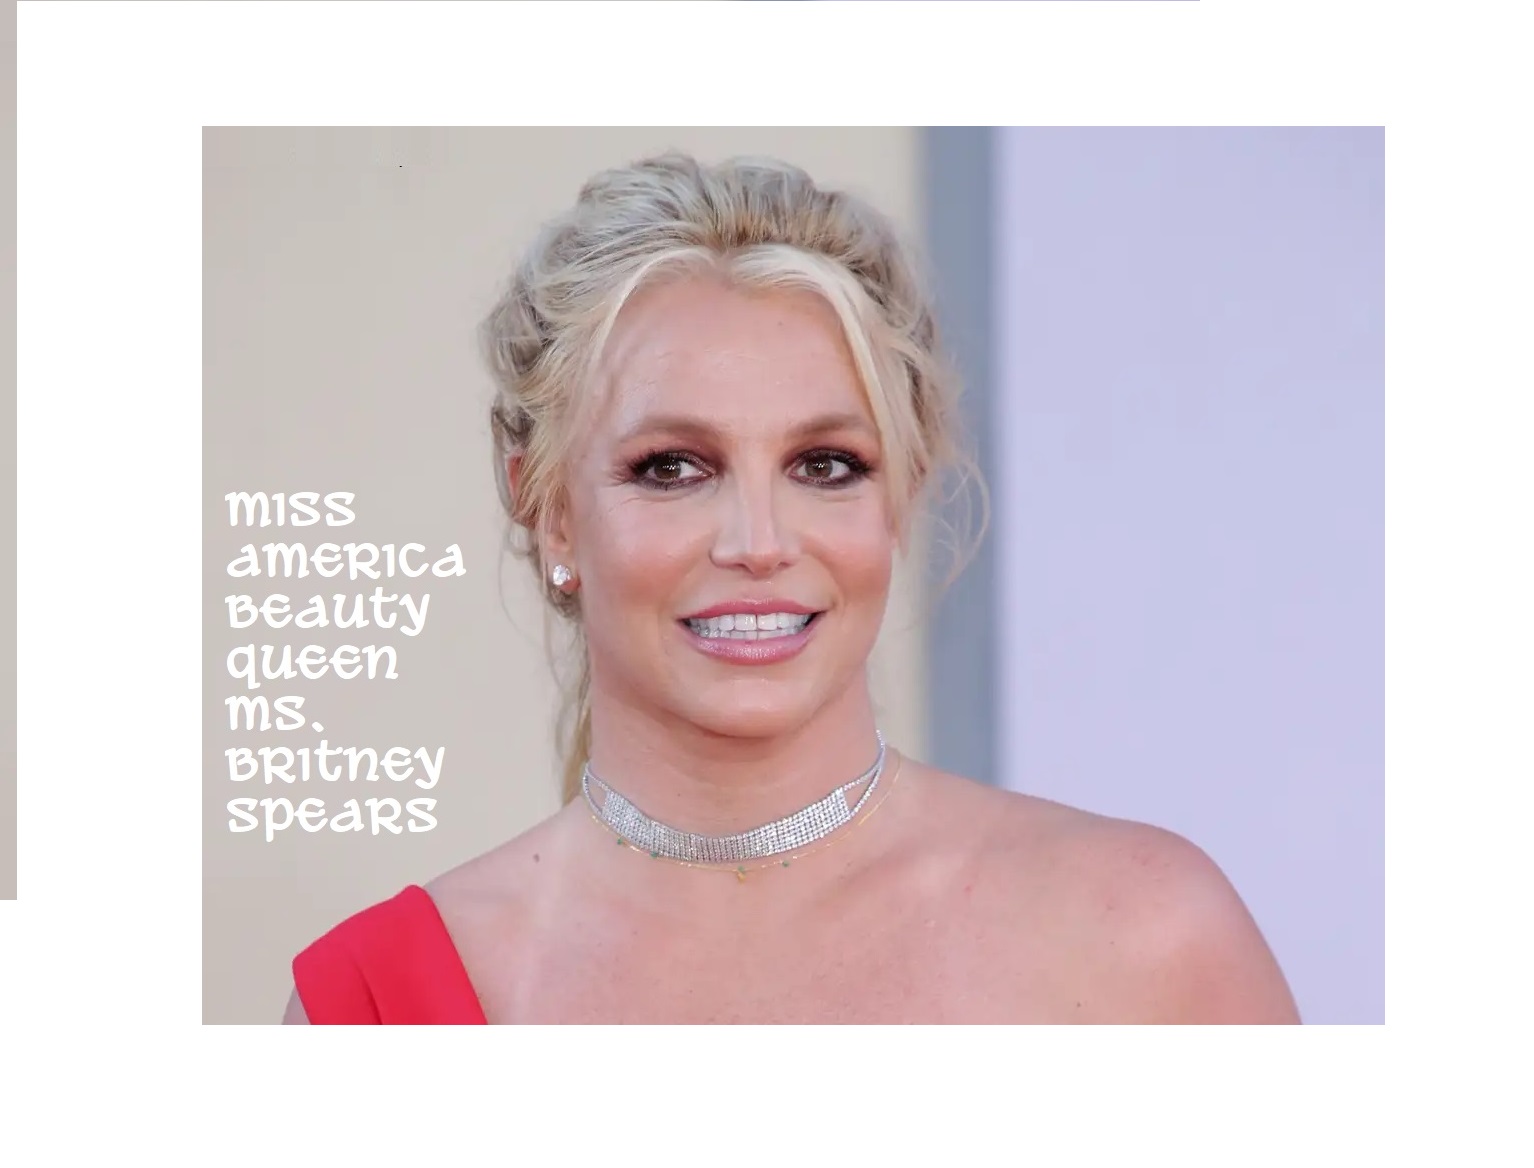 Top of our site at 10mostbeautifulwomen.com - dear Ms. Britney spears!!